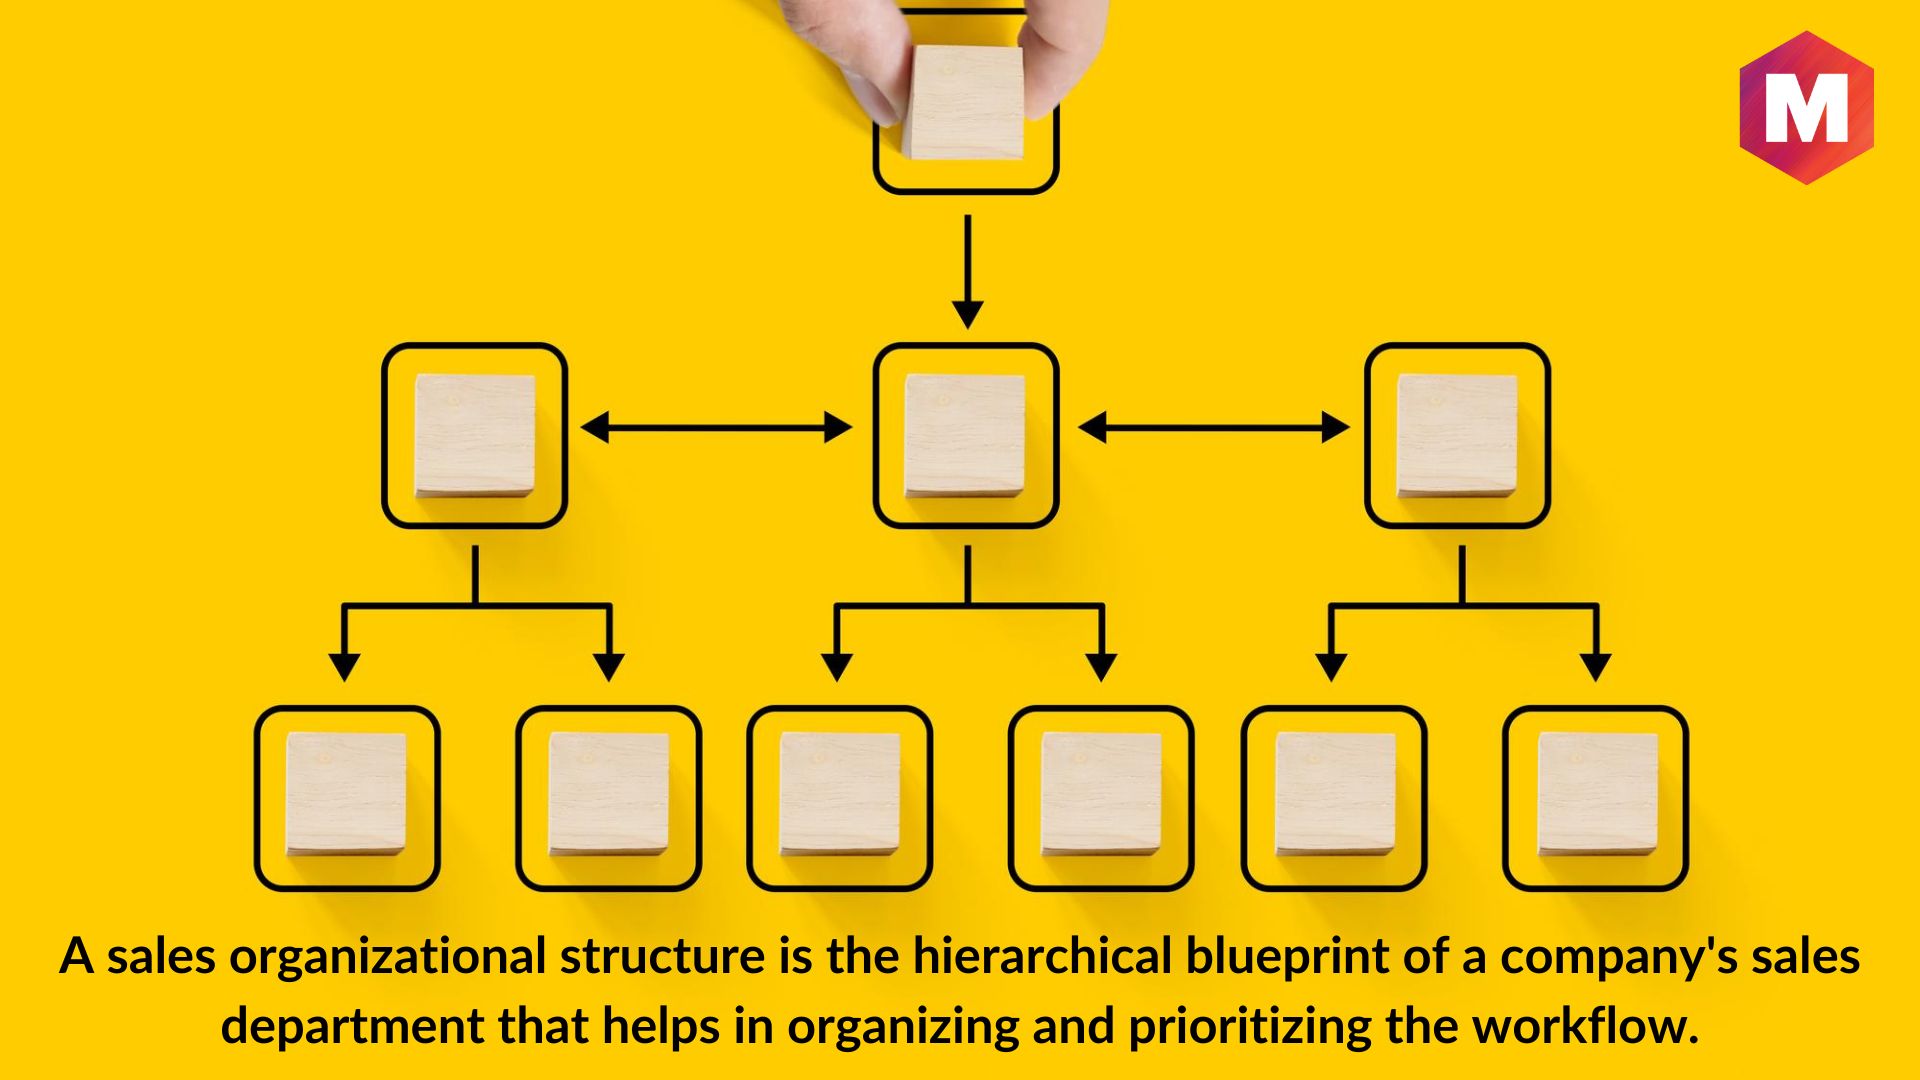 What is the Sales Organizational Structure